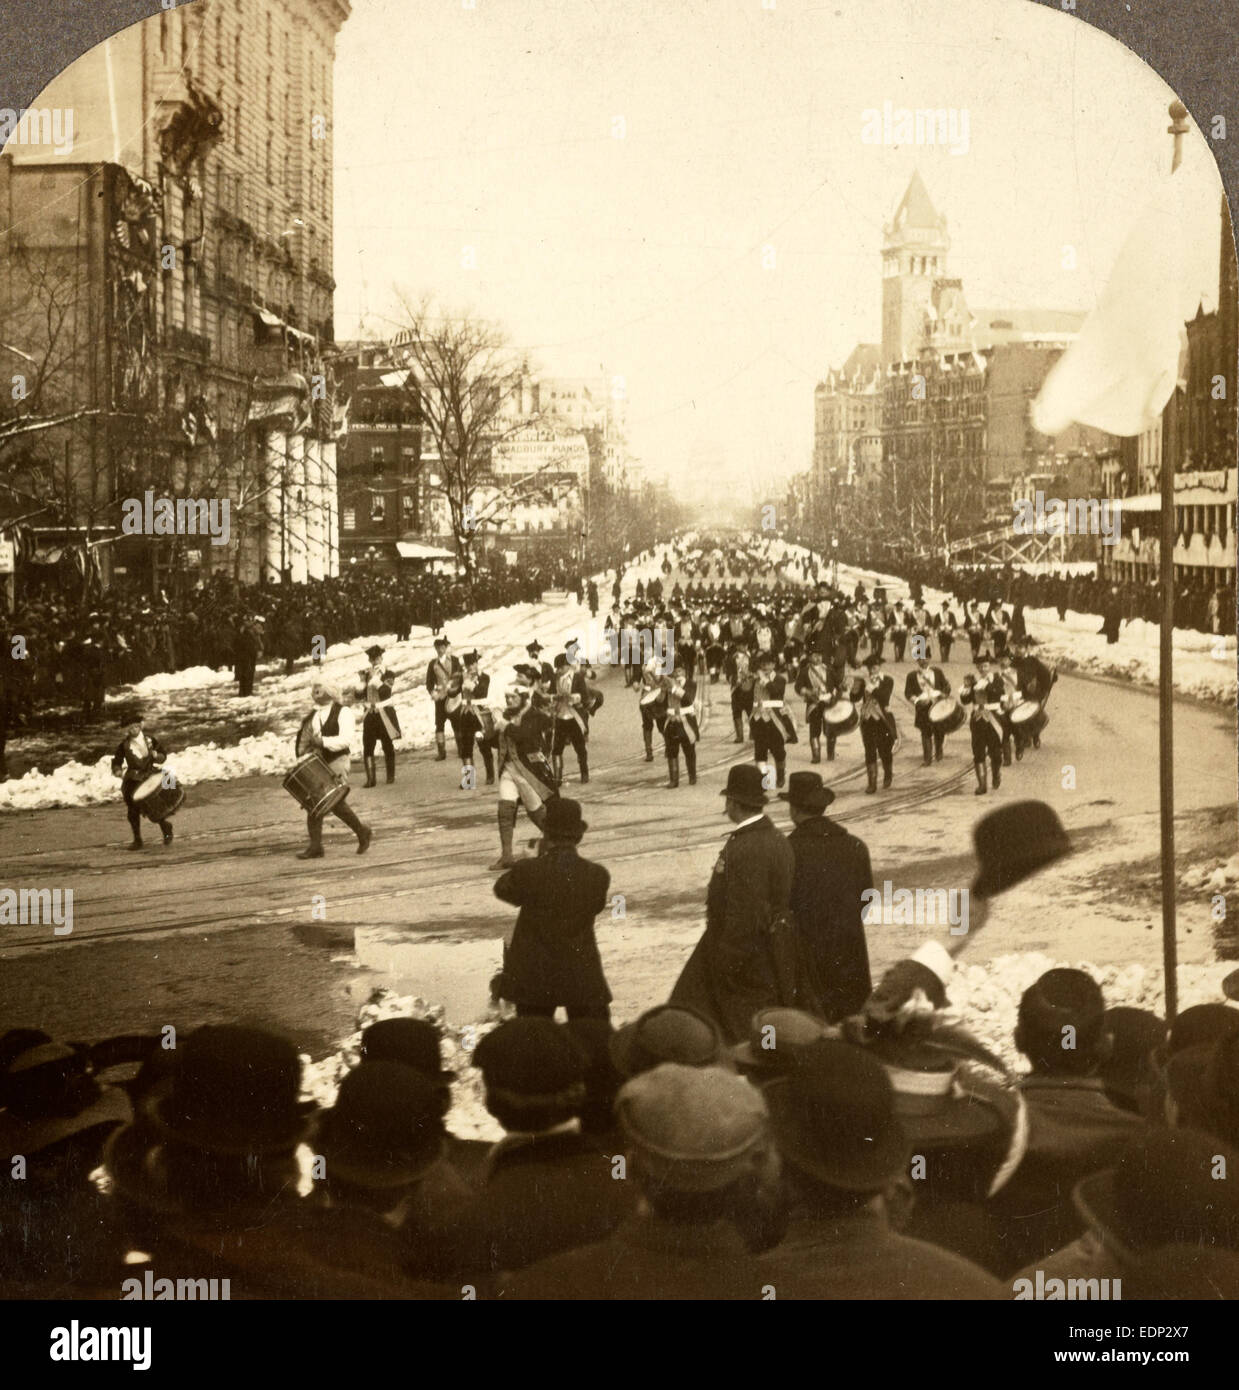 Keeping step to fife and drum. Inaugural parade, Washington, D.C., March 4, 1909, US, USA, America, Vintage photography Stock Photo